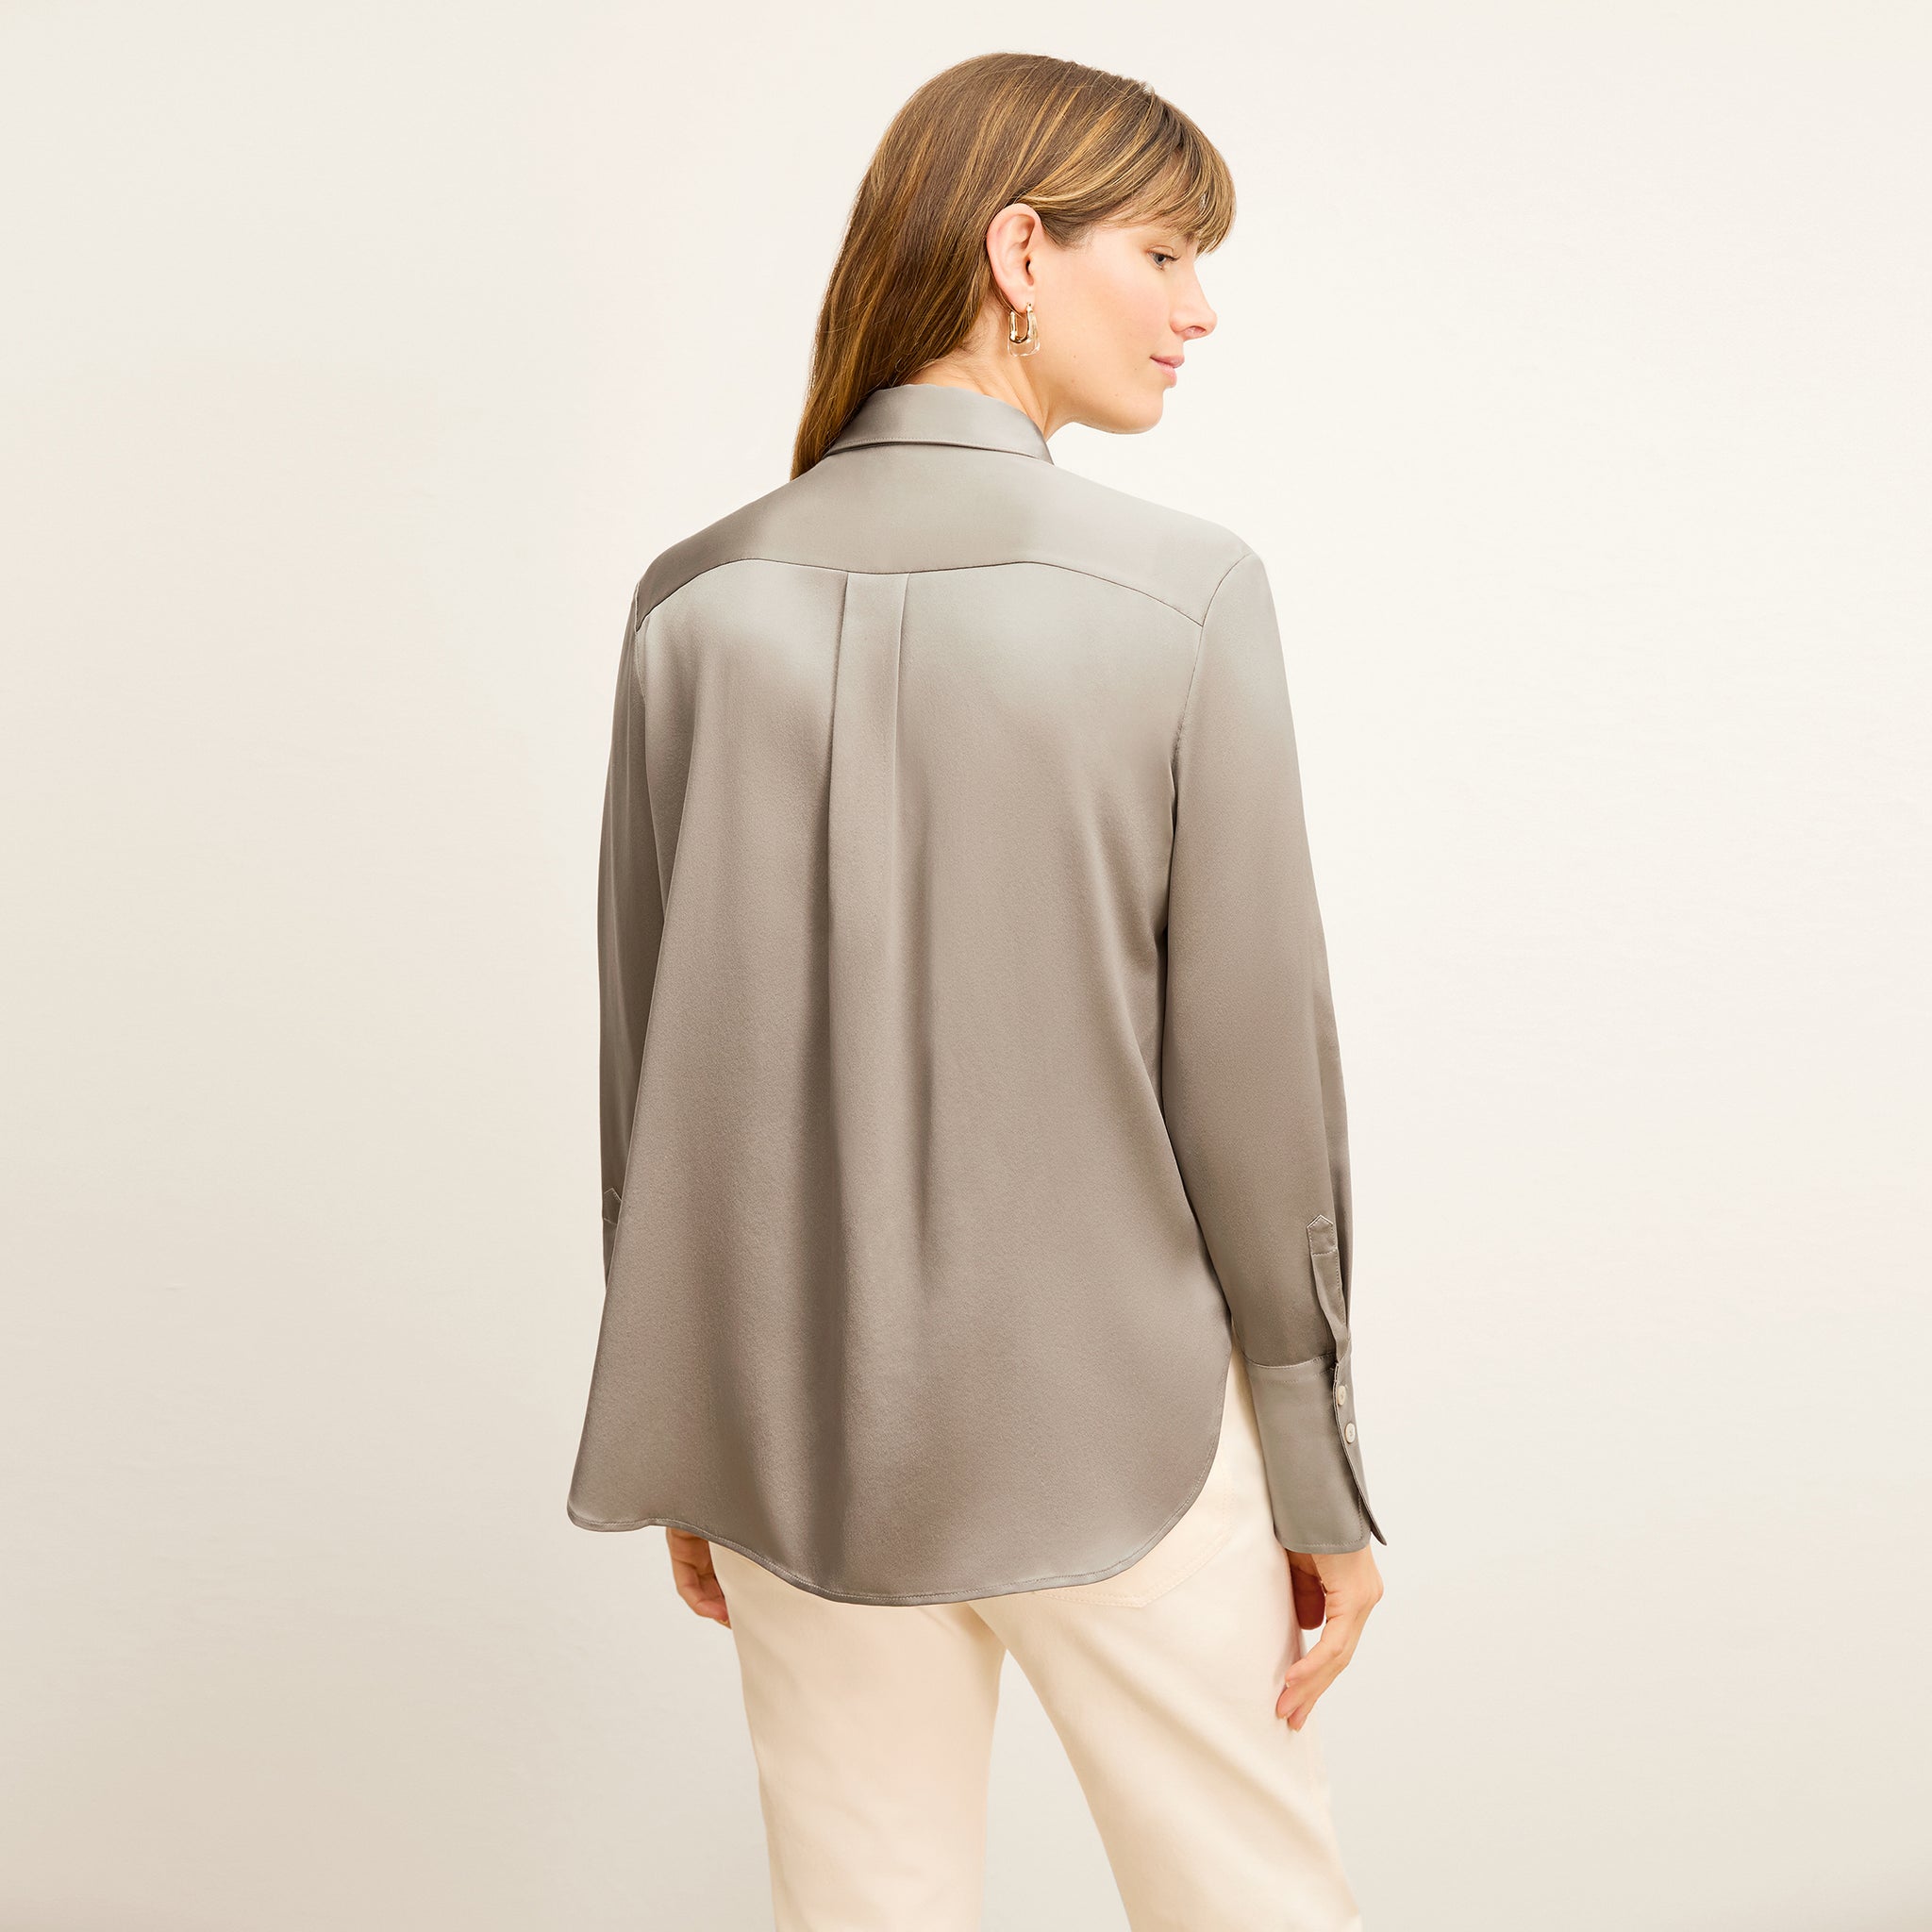 back image of a woman wearing the tatum top in dune